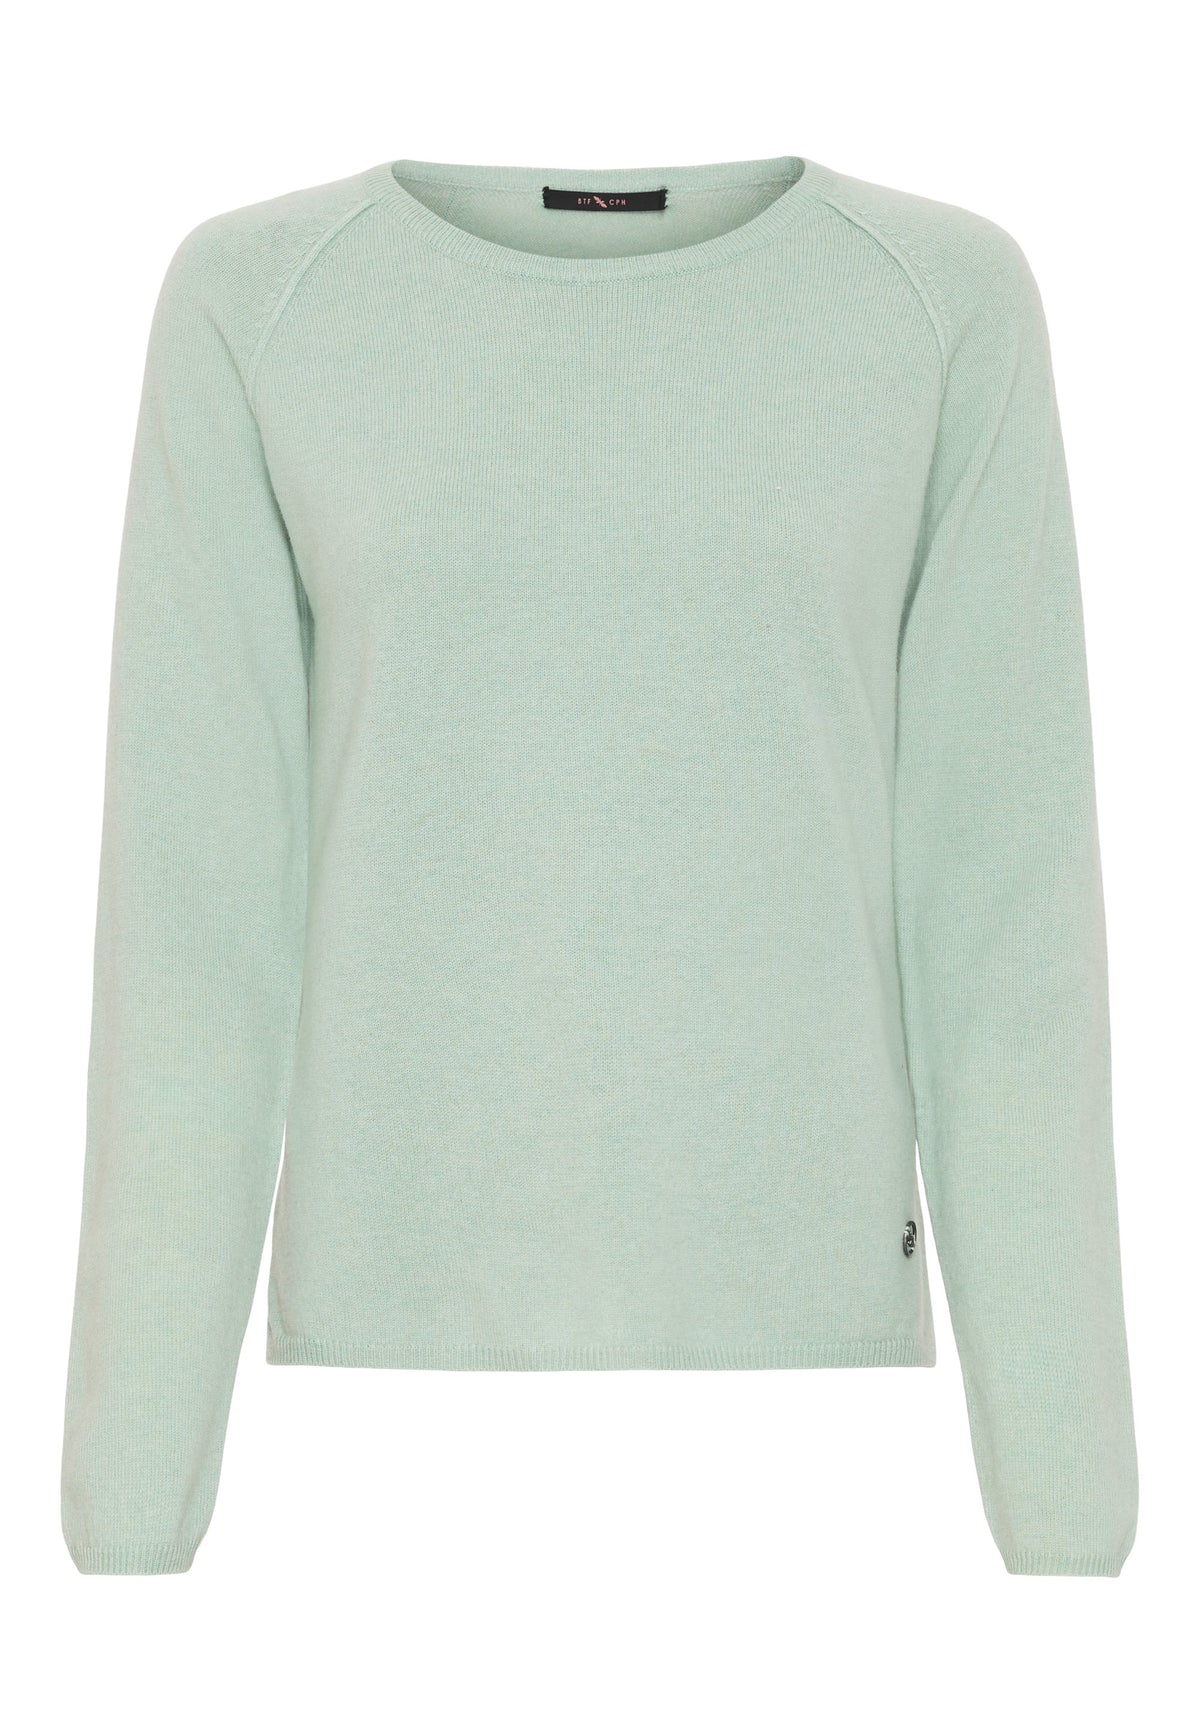 BTFCPH Pullover i cashmere blanding Pullovers Grøn